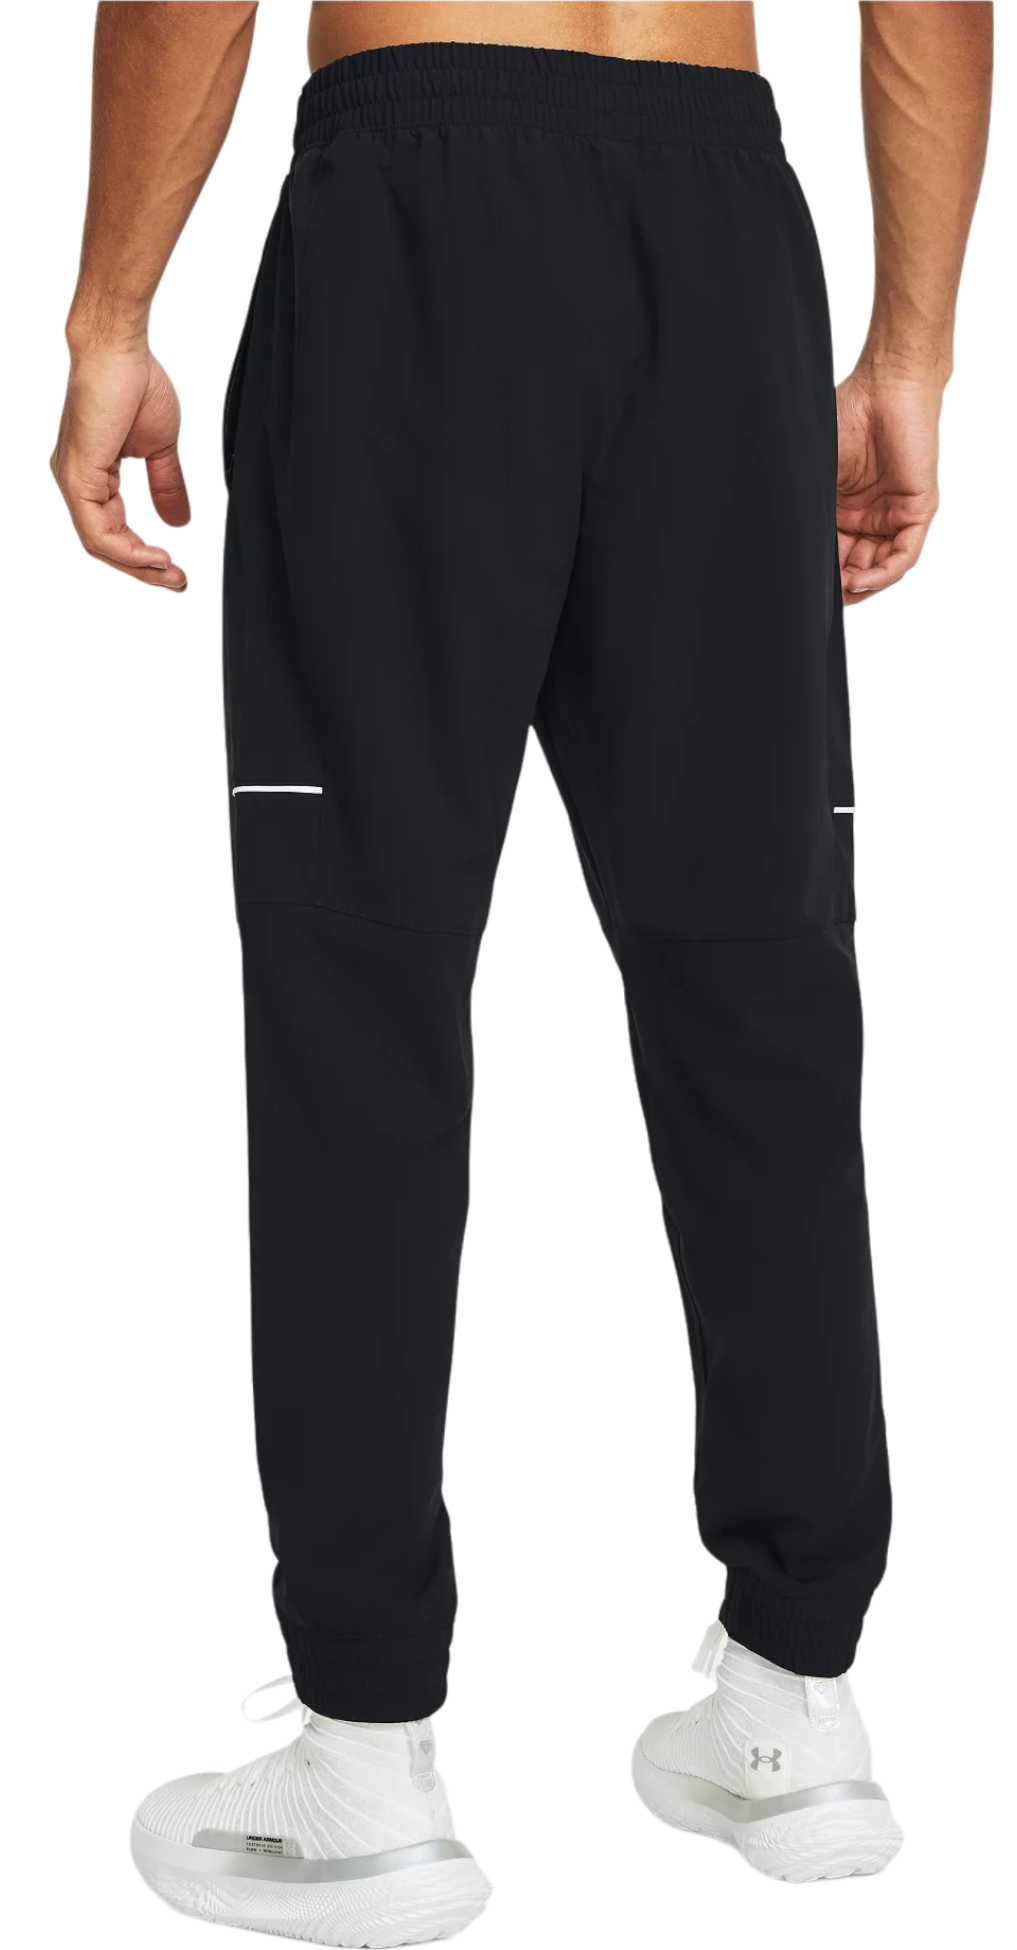 https://i1.t4s.cz/products/1383401-001/under-armour-ua-zone-woven-pants-718108-1383401-002.png